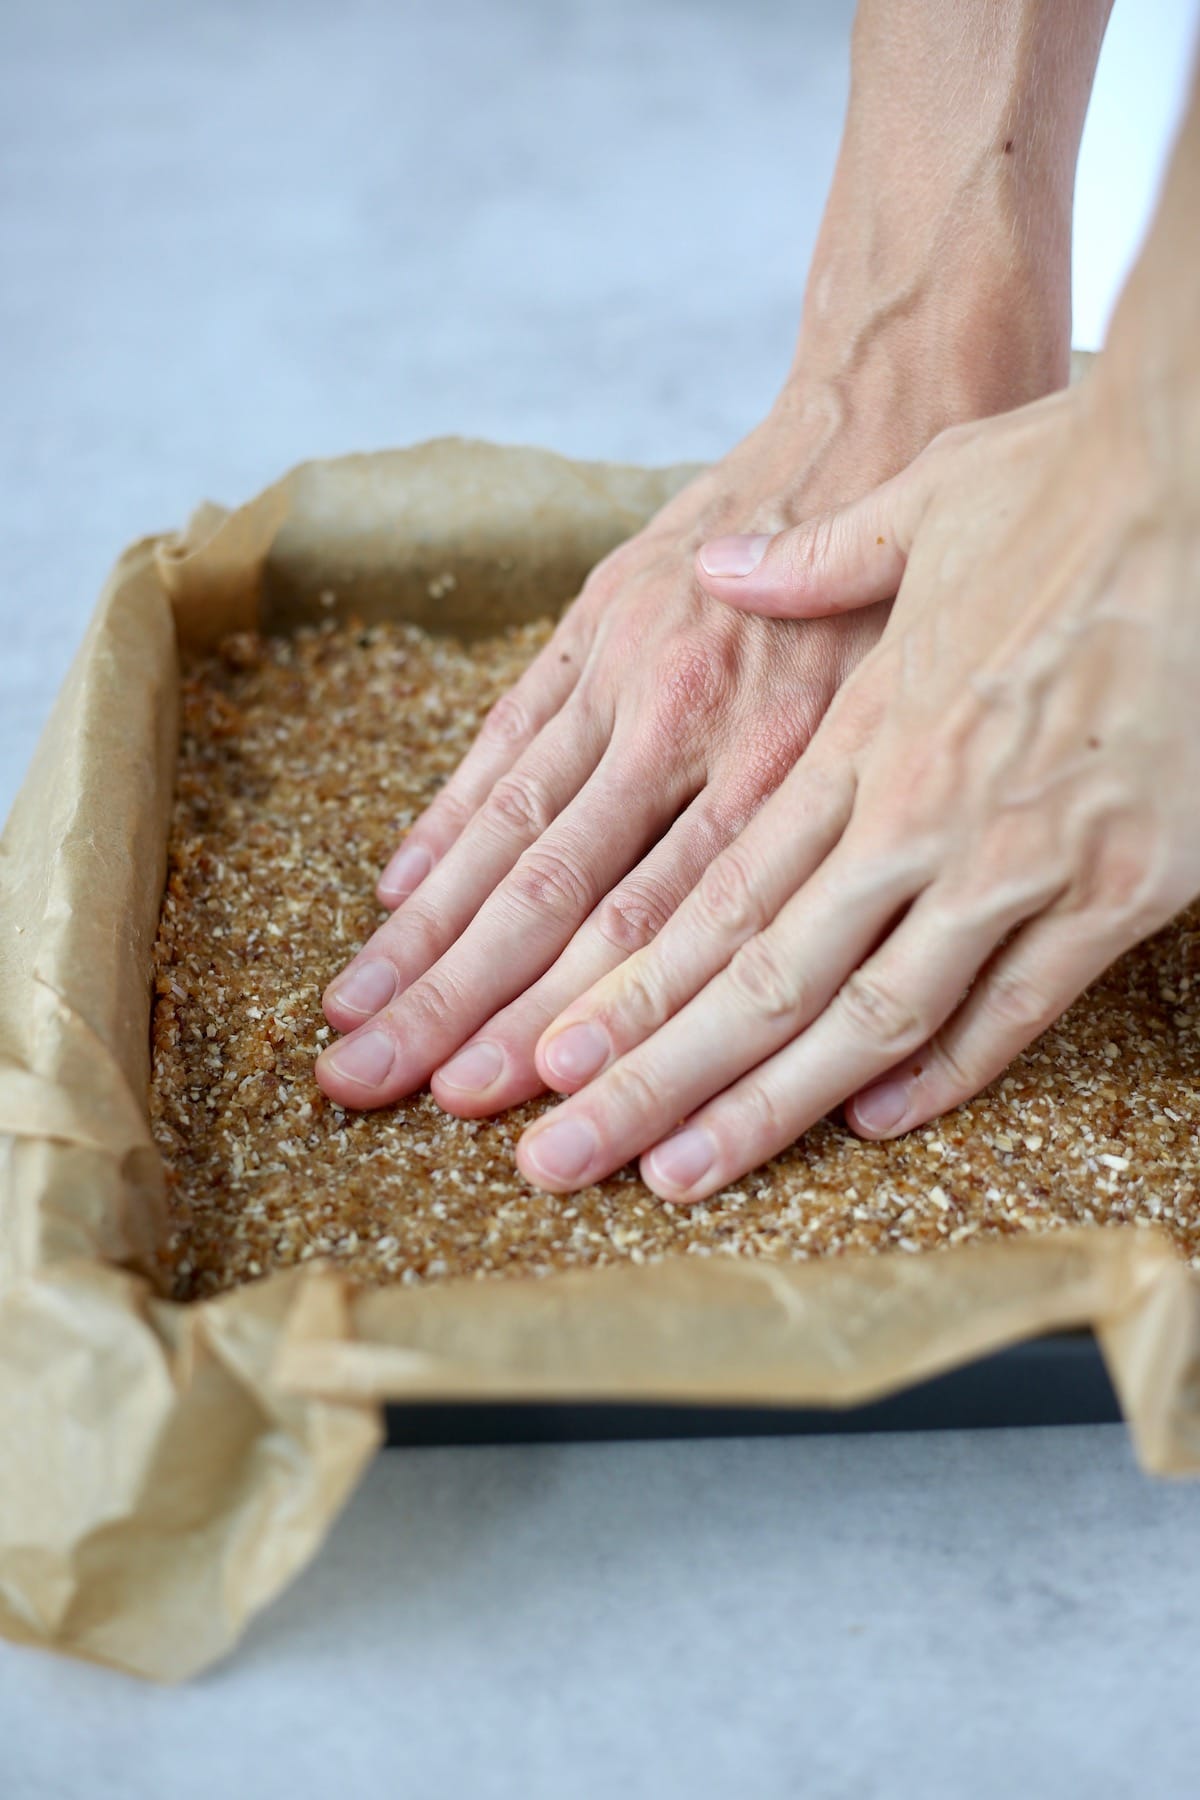 two hands pressing down on some granola bar dough that is inside of a baking dish lined with brown parchment paper